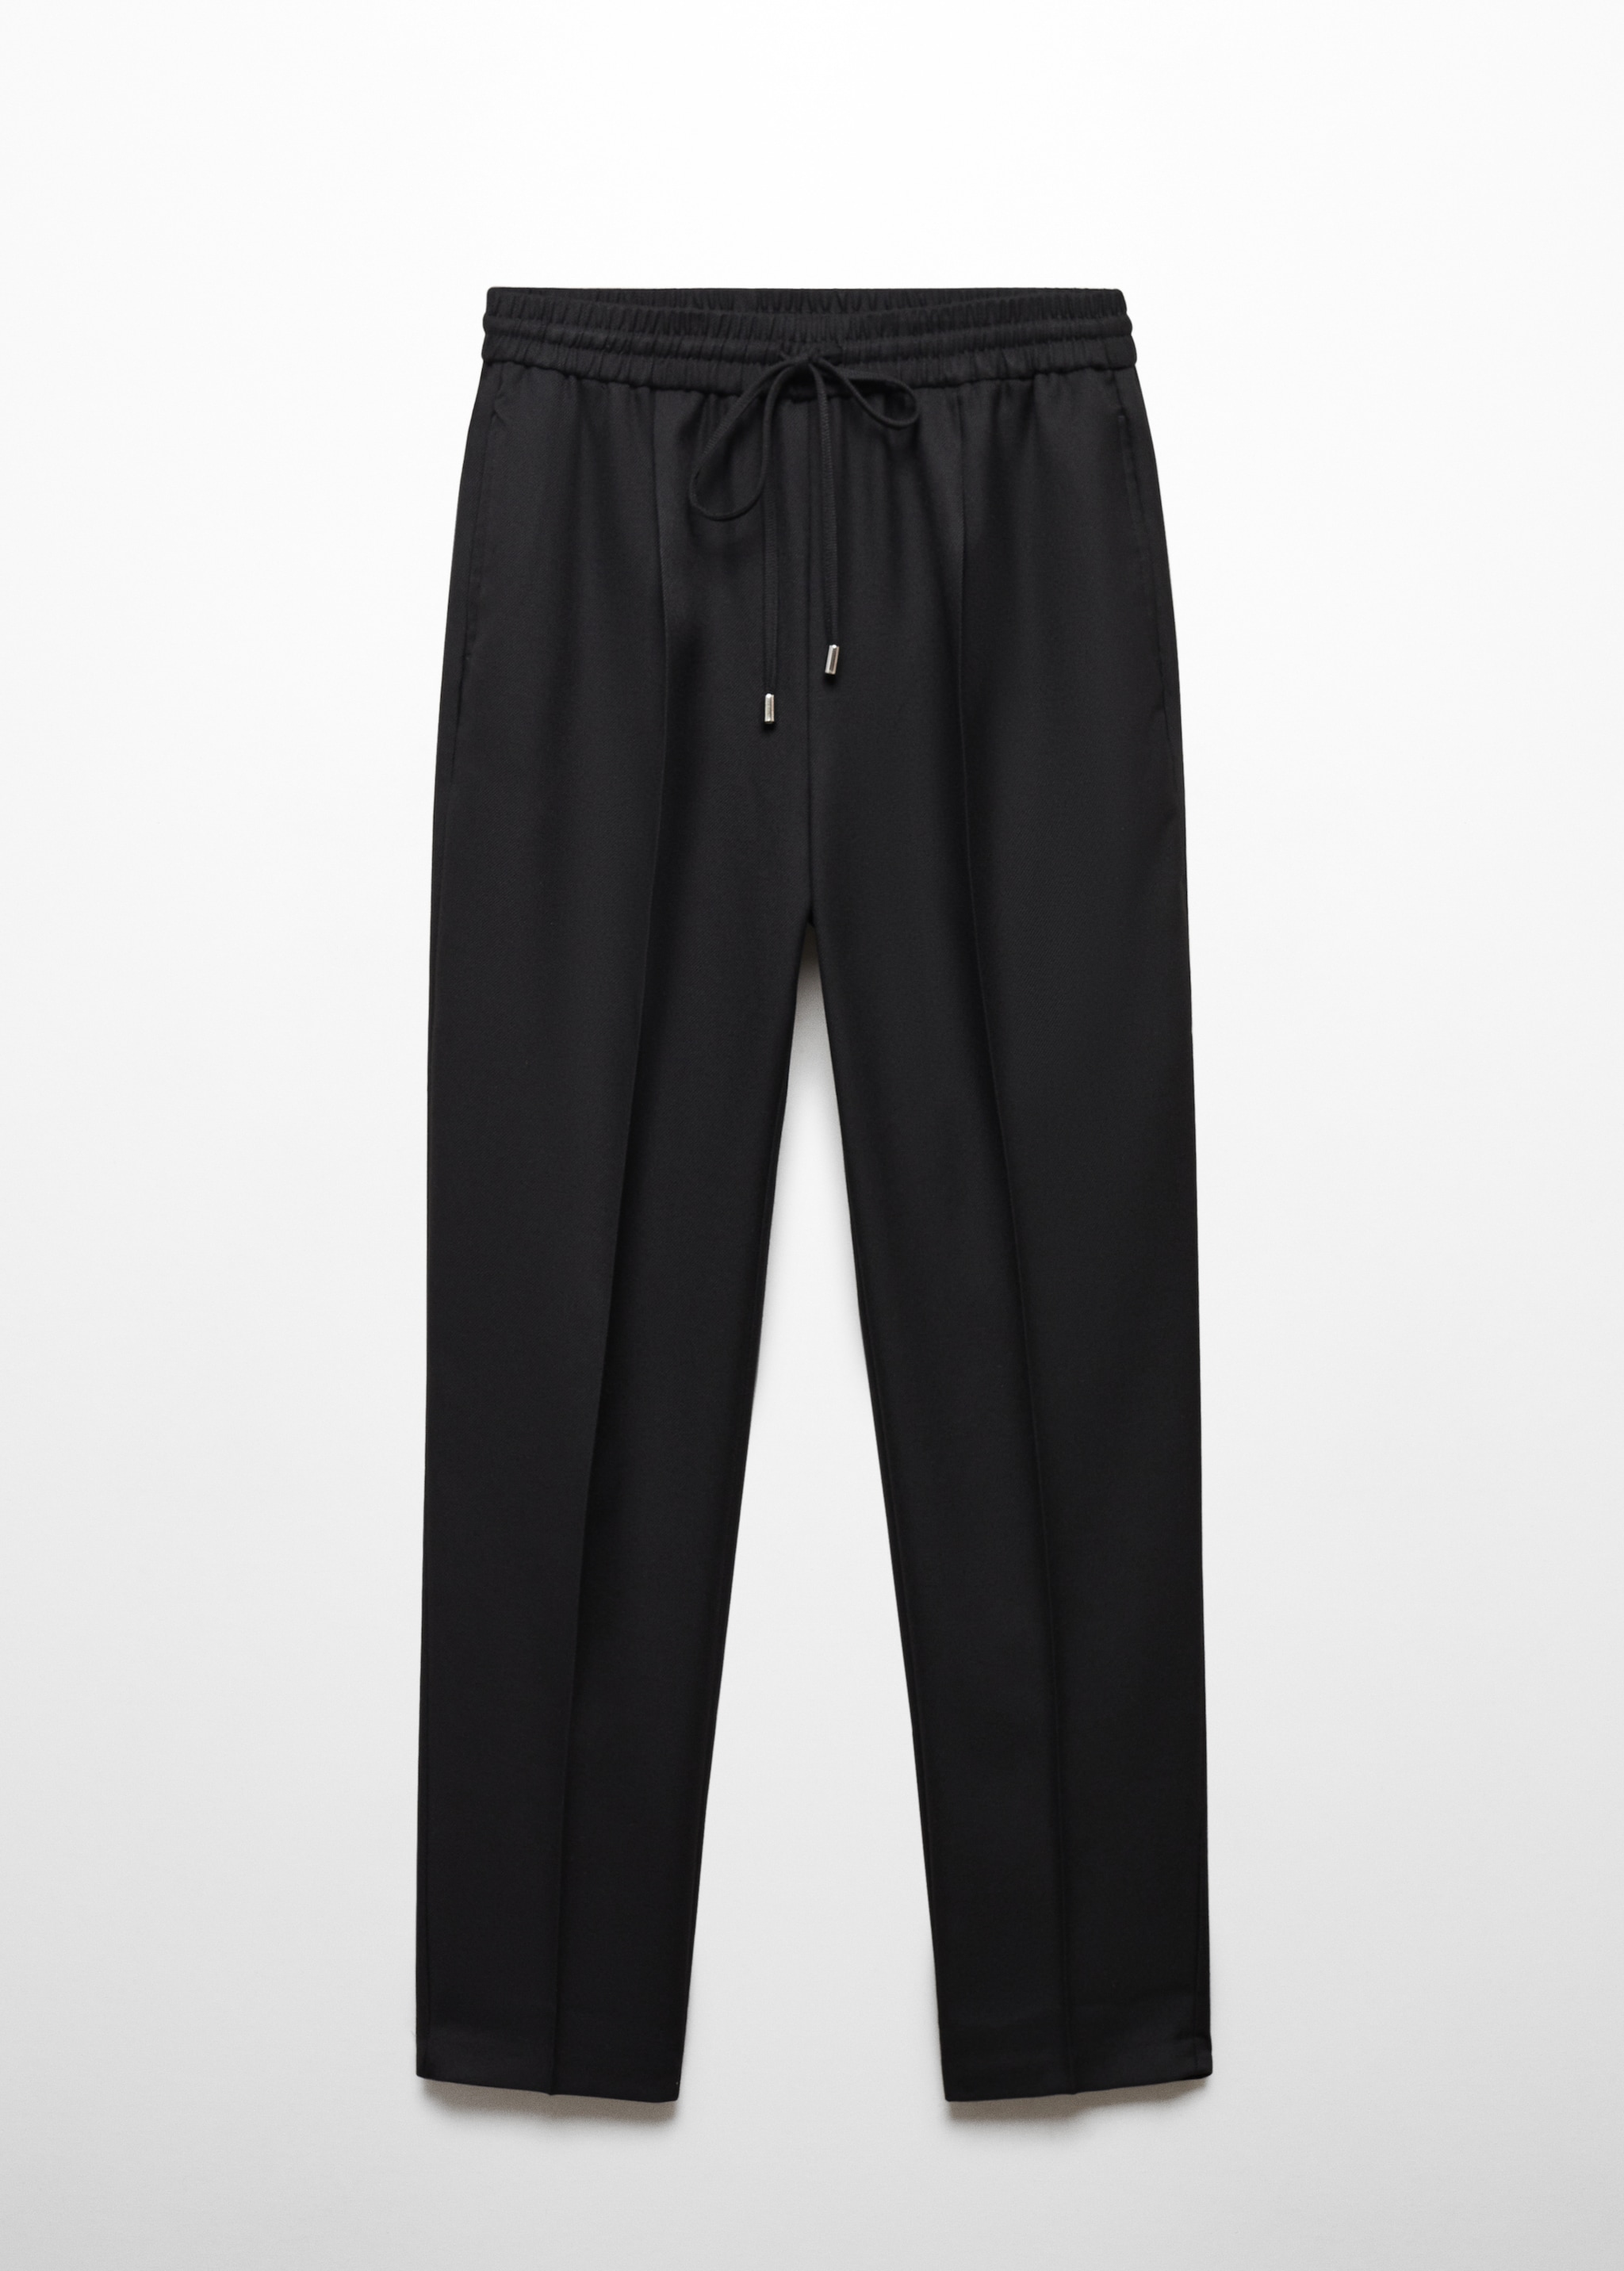 Flowy jogger pants - Article without model